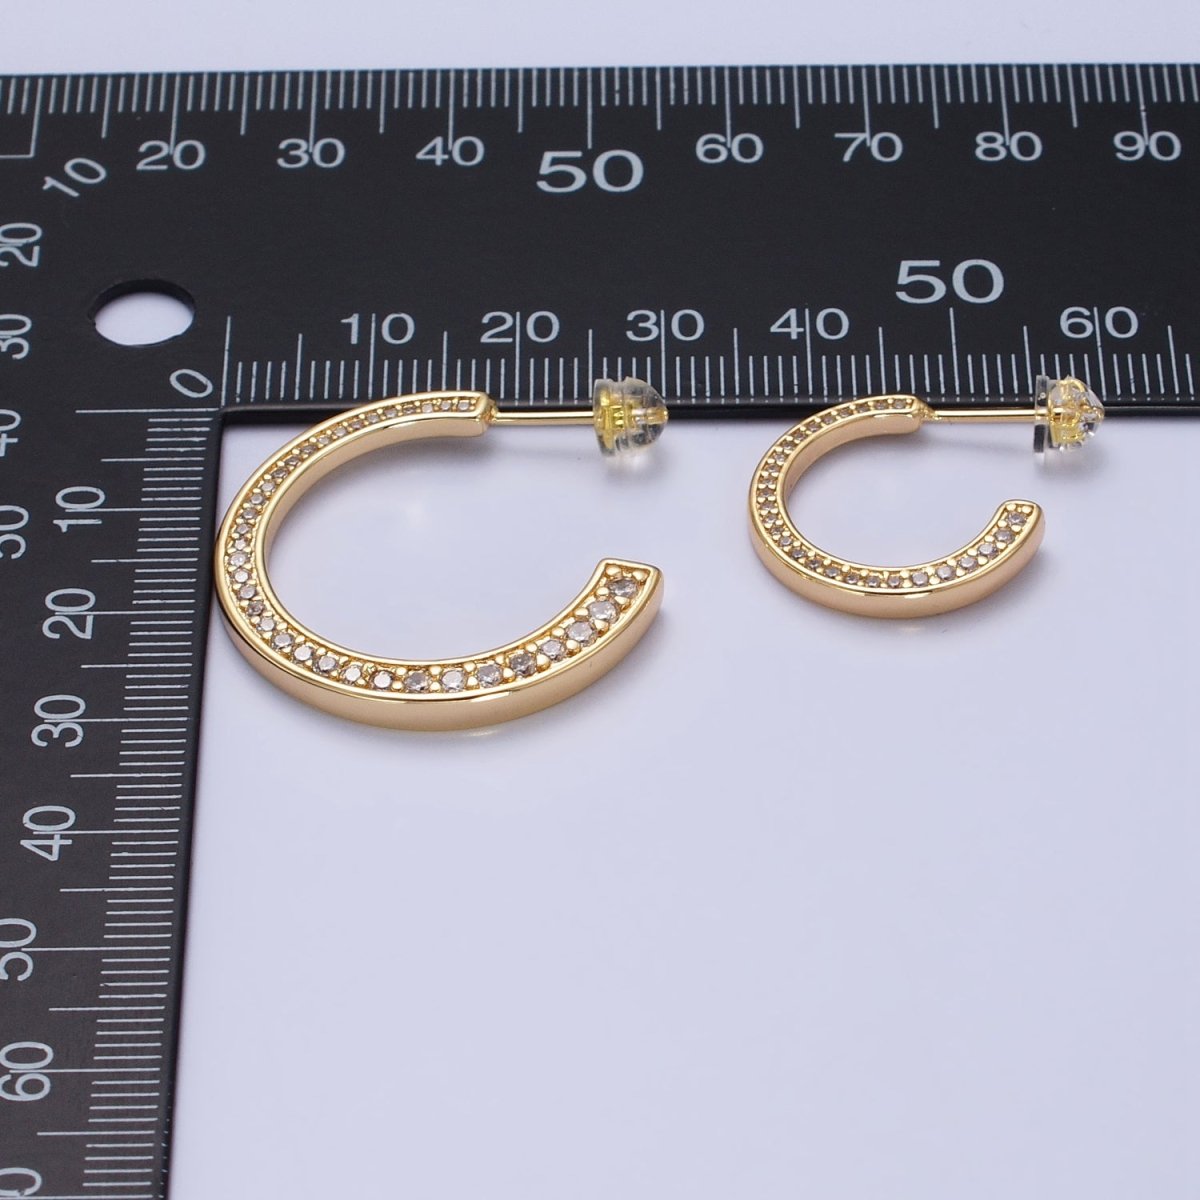 16K Gold Filled Round CZ Lined 20mm, 30mm C-Shaped Hoop Earrings in Gold & Silver | AB518 AB519 AB528 AB529 - DLUXCA